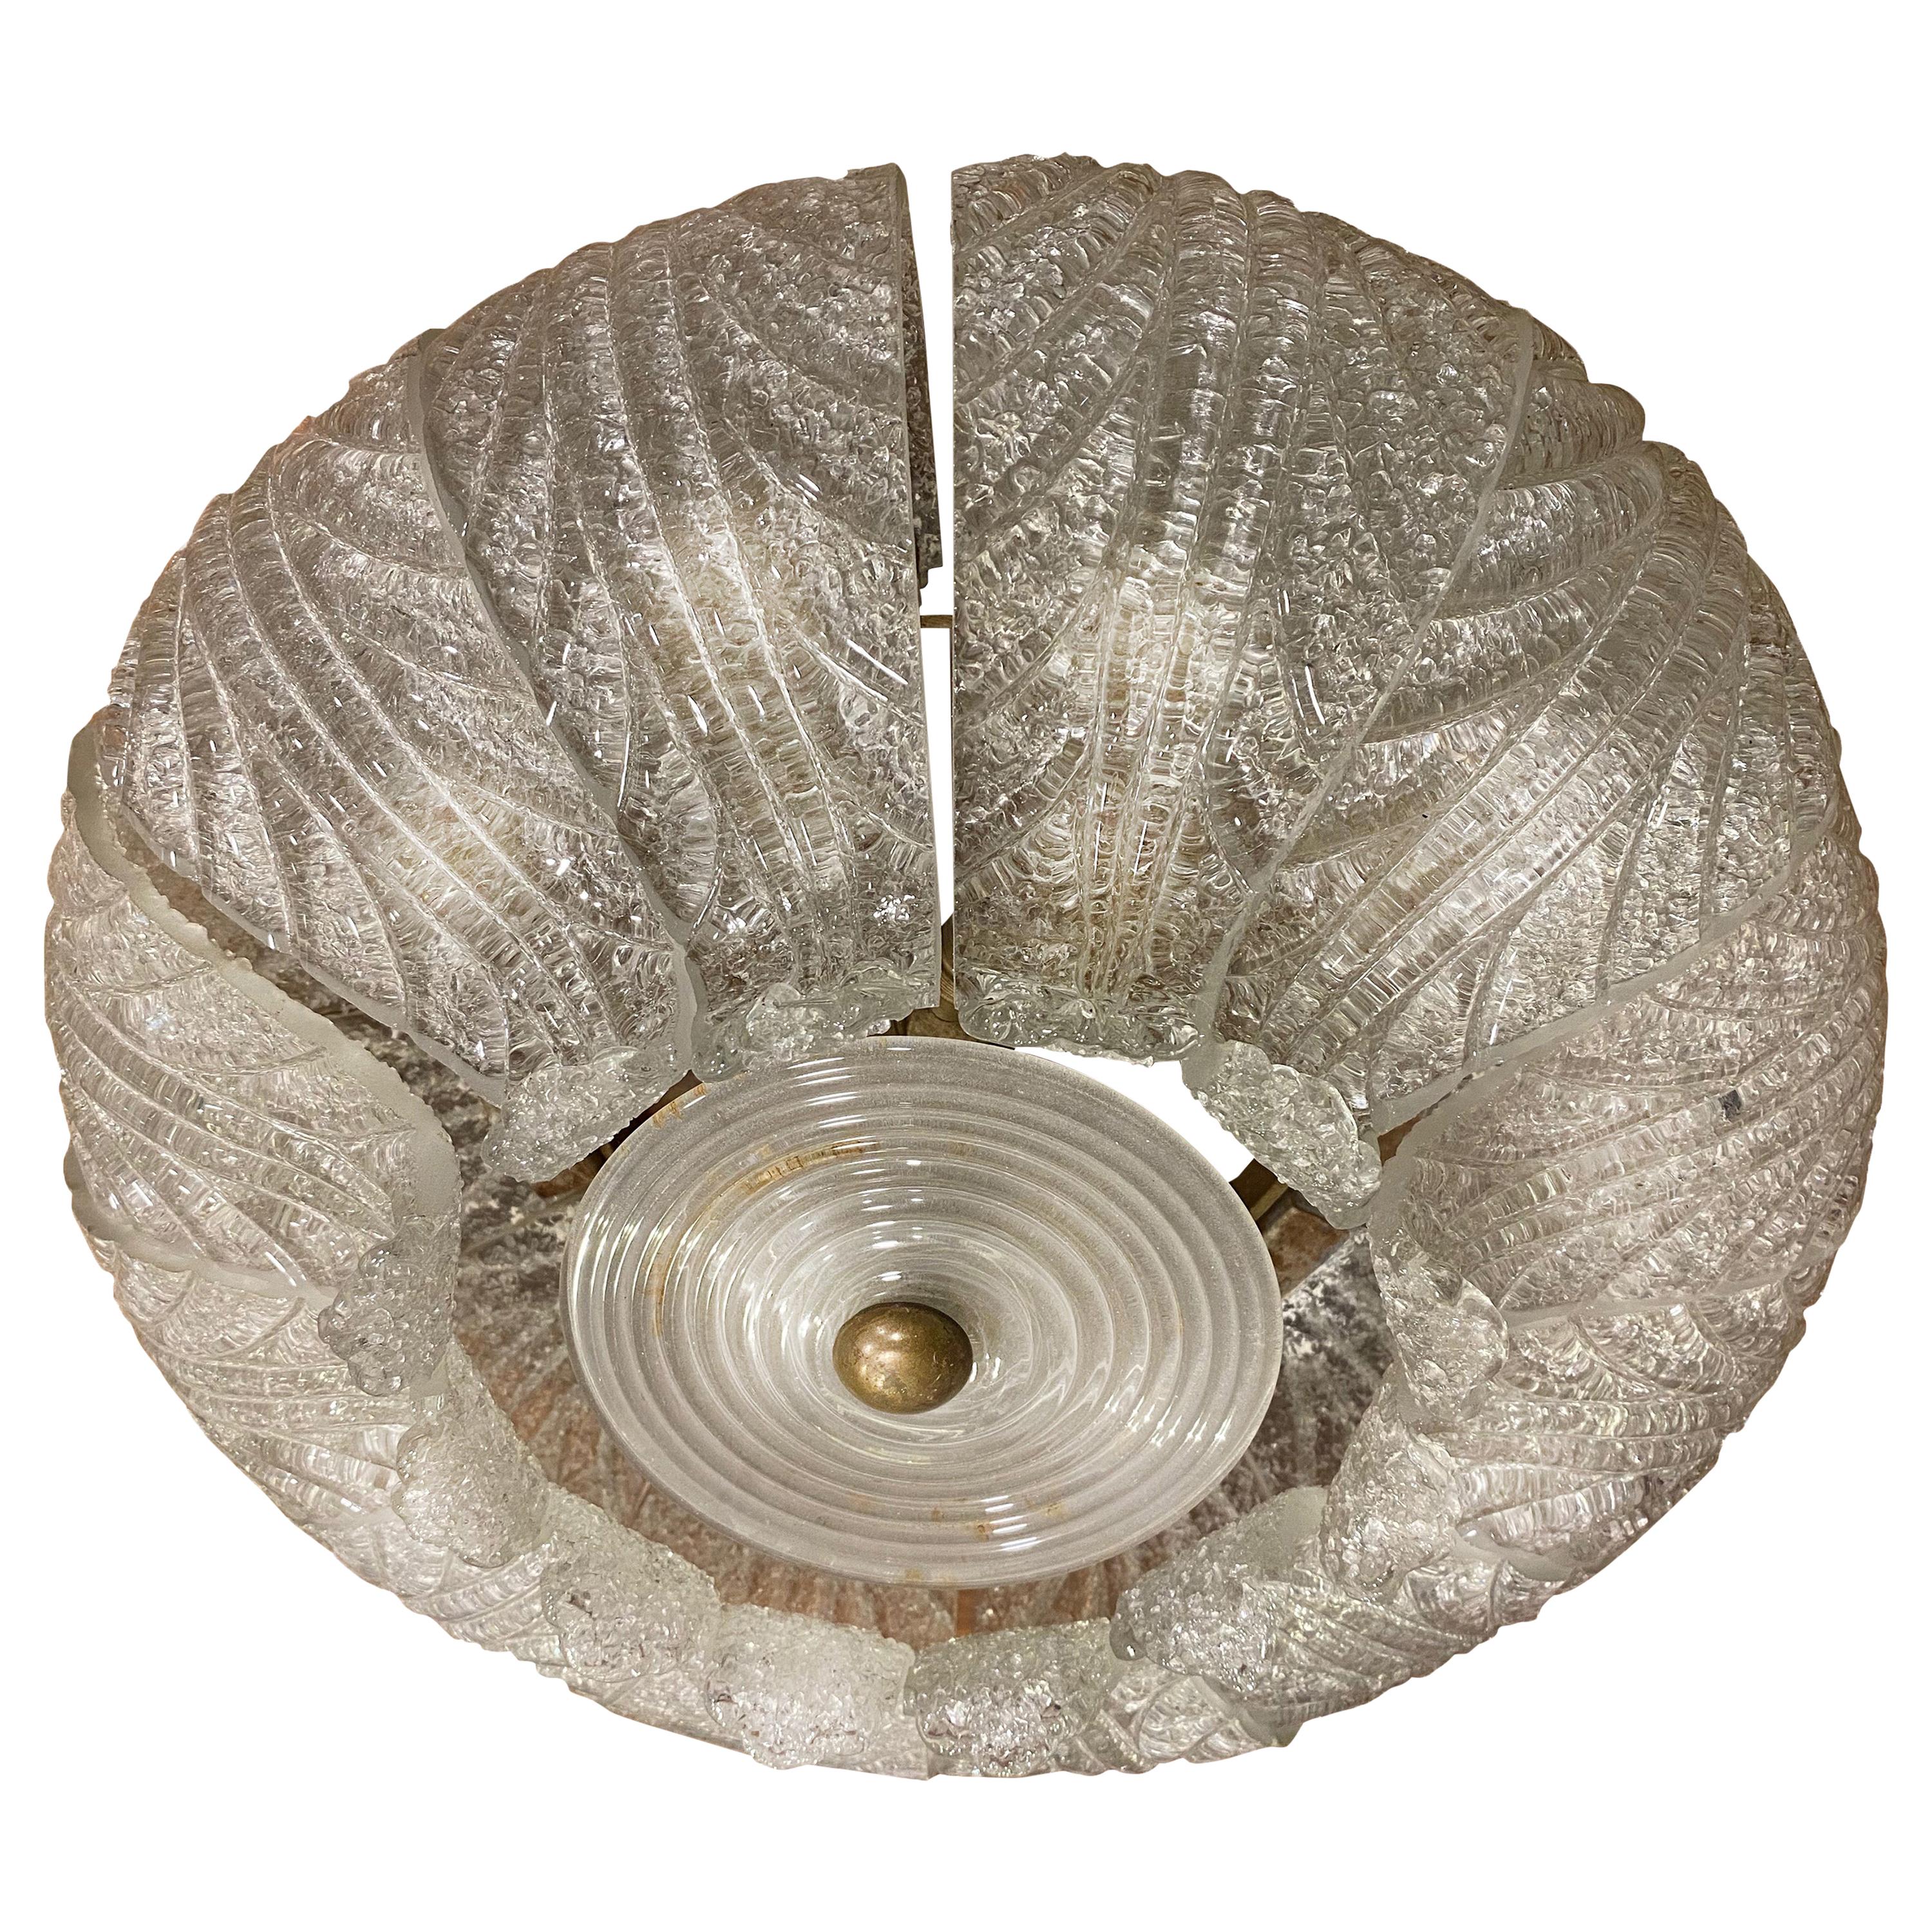 Barovier & Toso Ceiling Light, Murano, 1950 For Sale